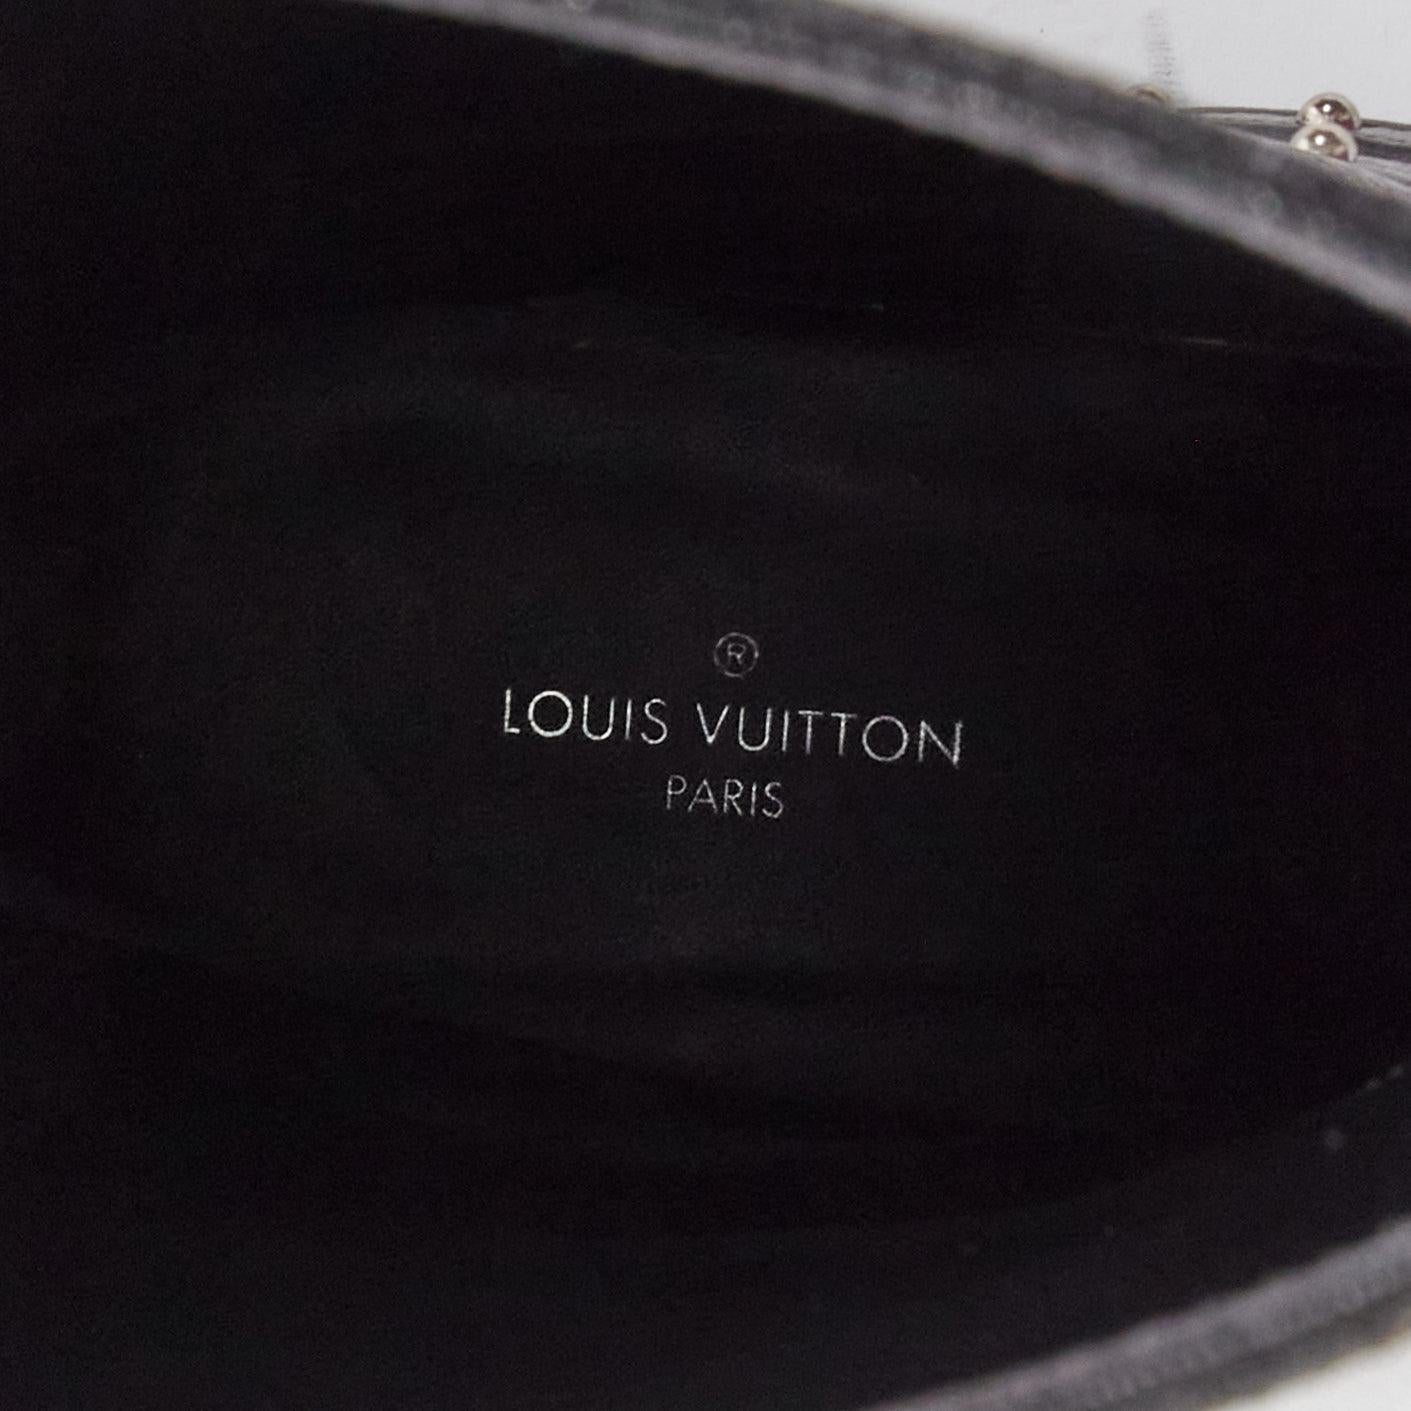 LOUIS VUITTON LV monogram top strap pull on motorcycle boots EU37 For Sale 4